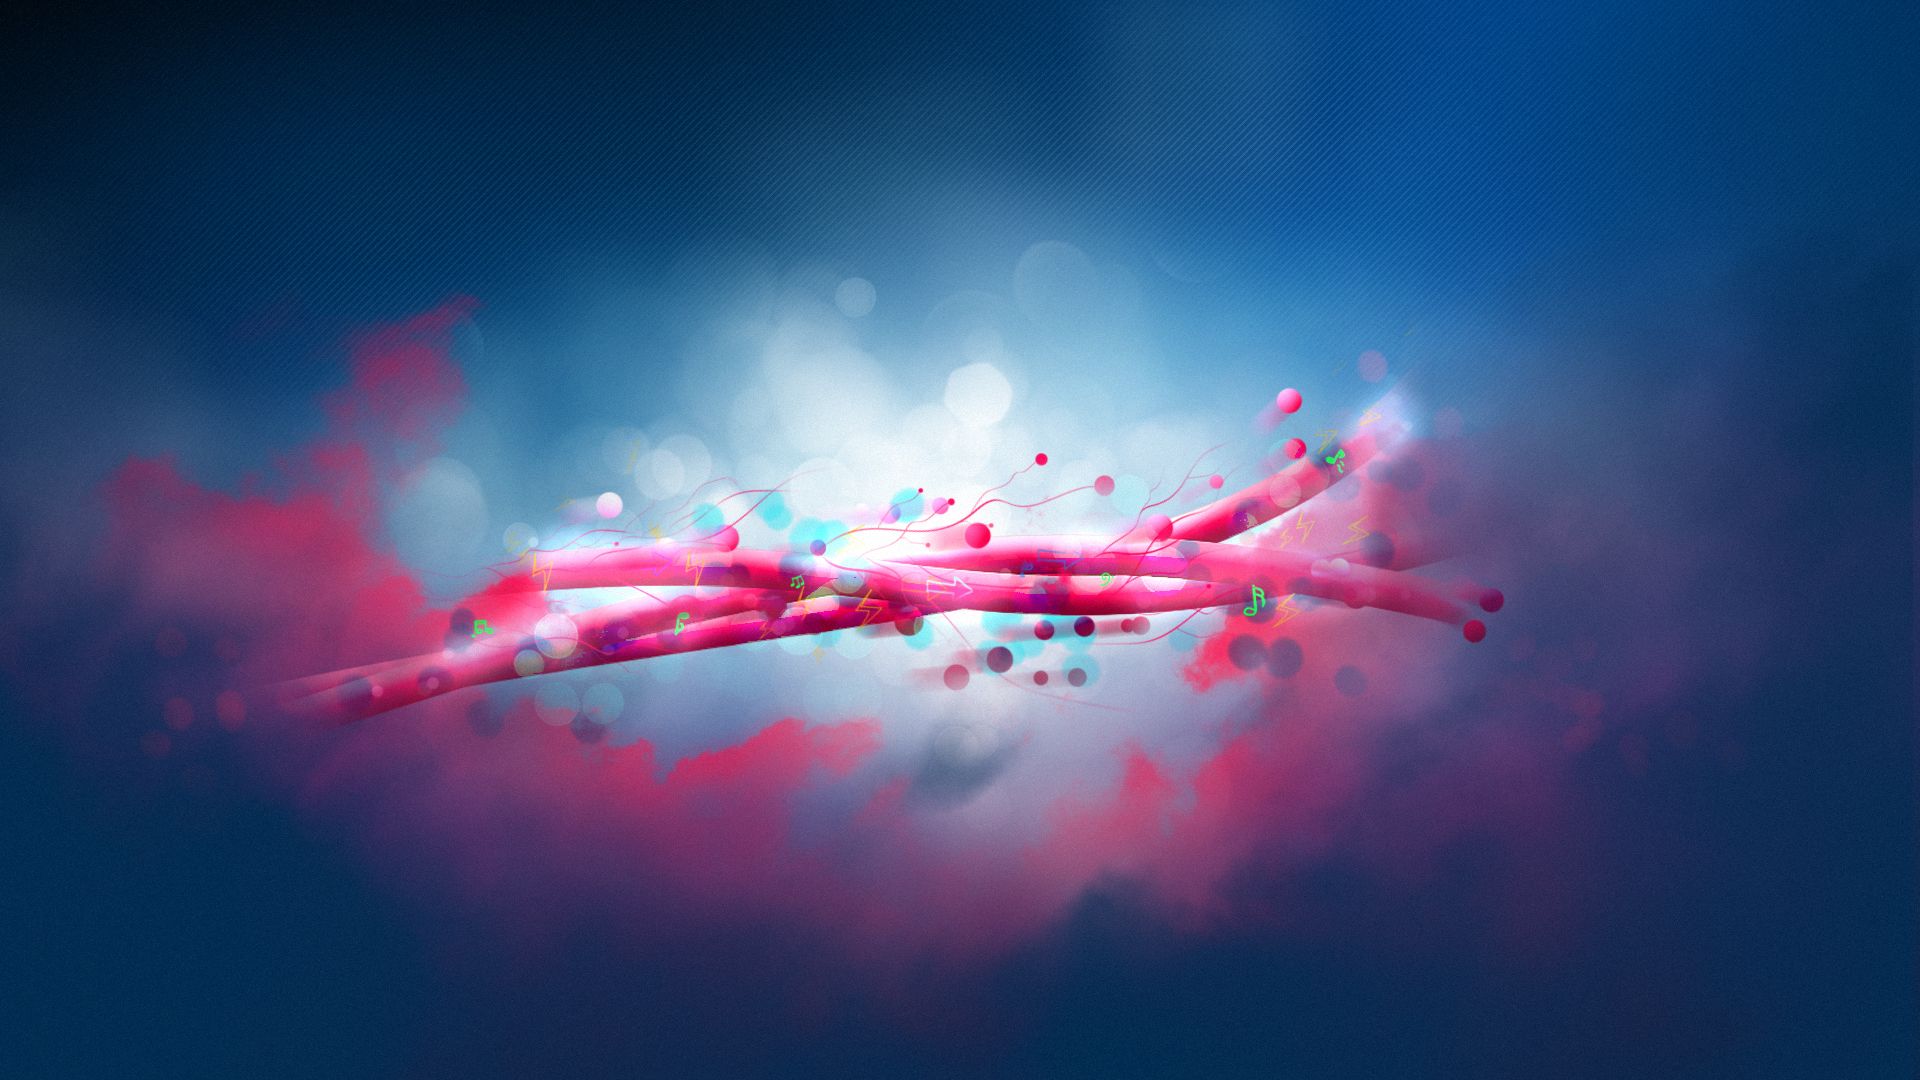 Abstract Wallpaper Full HD In Background